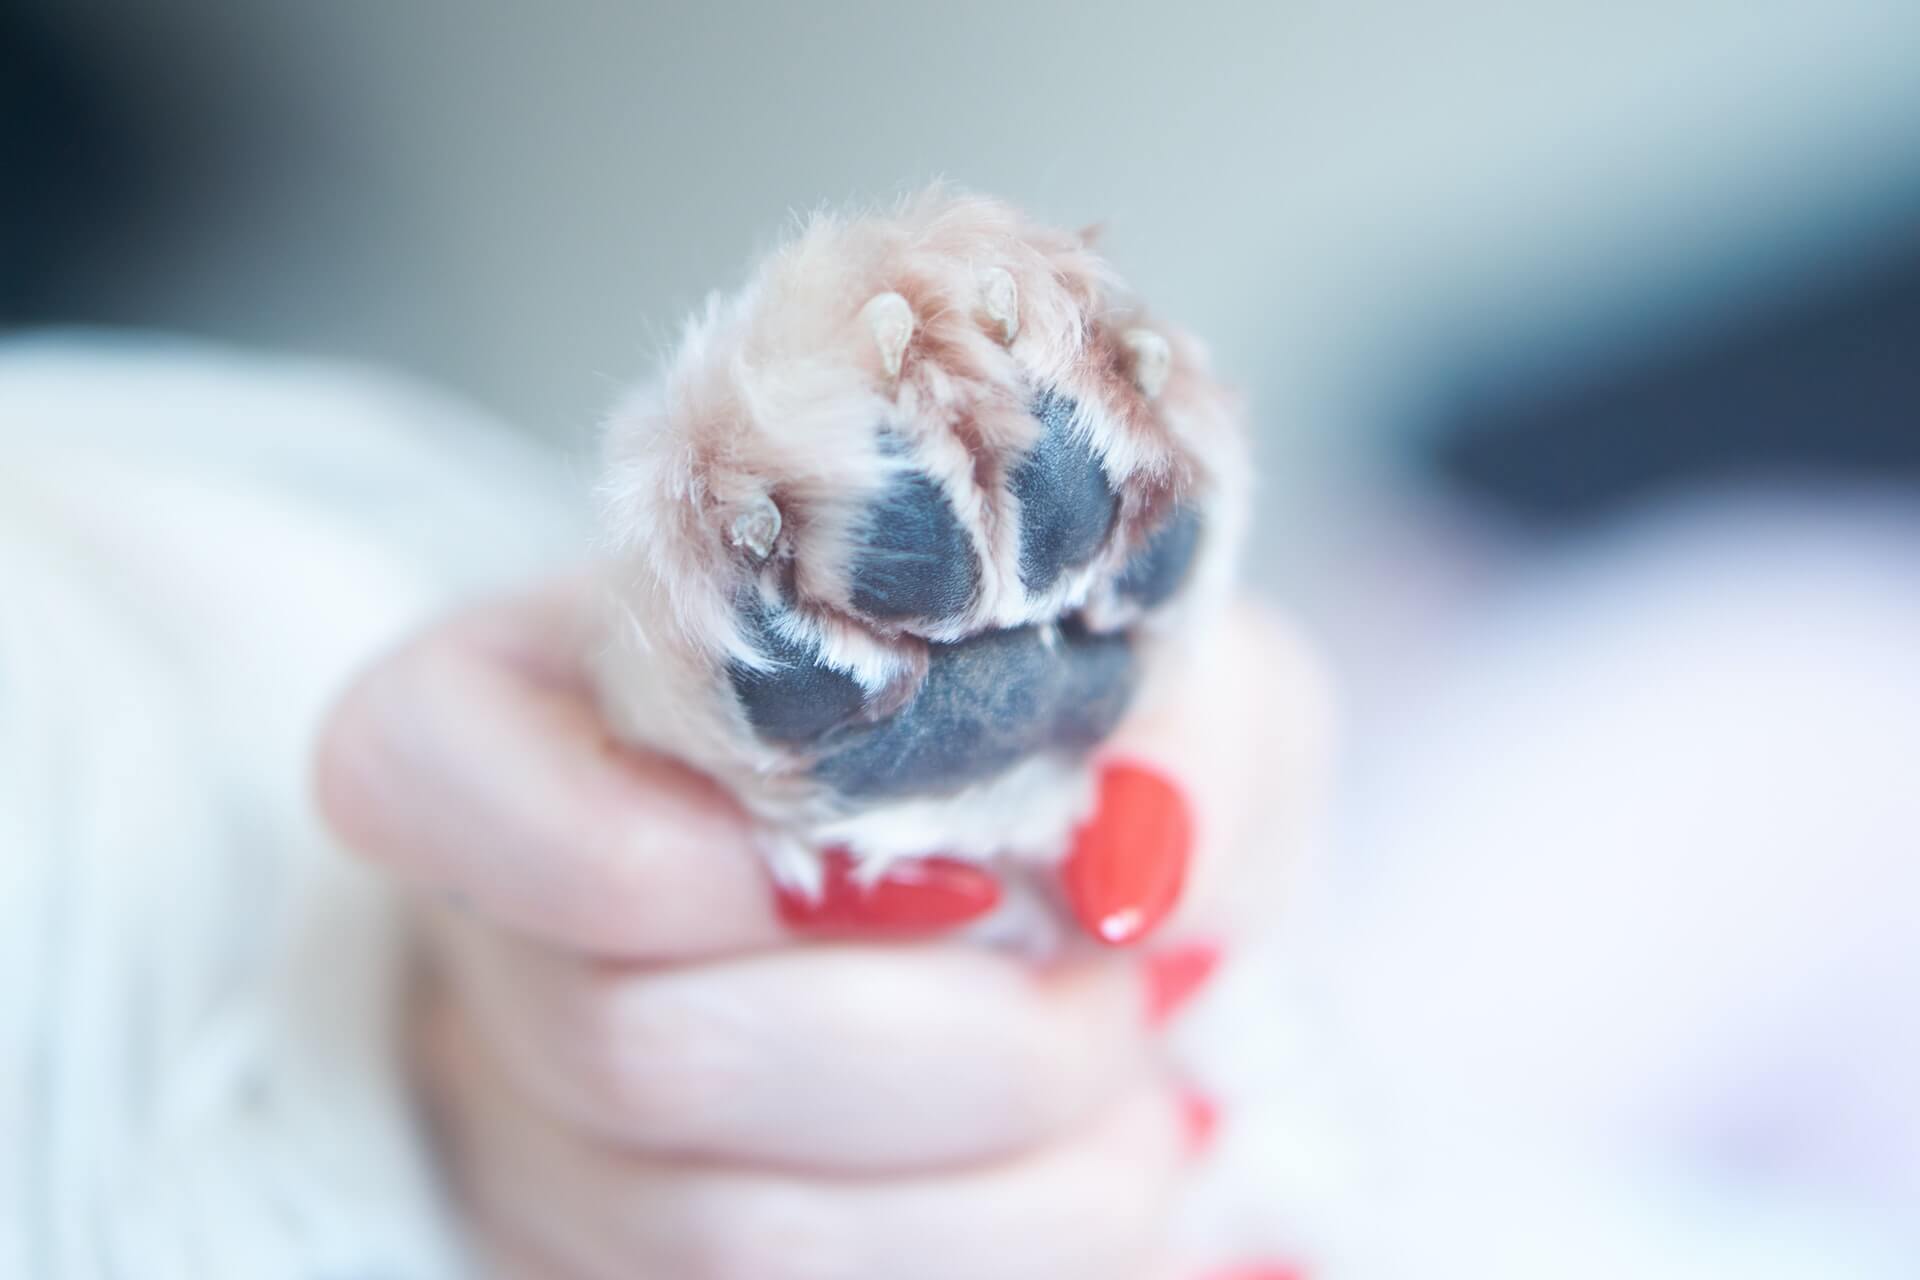 Trimming Your Dog’s Nails: A Step-By-Step Guide